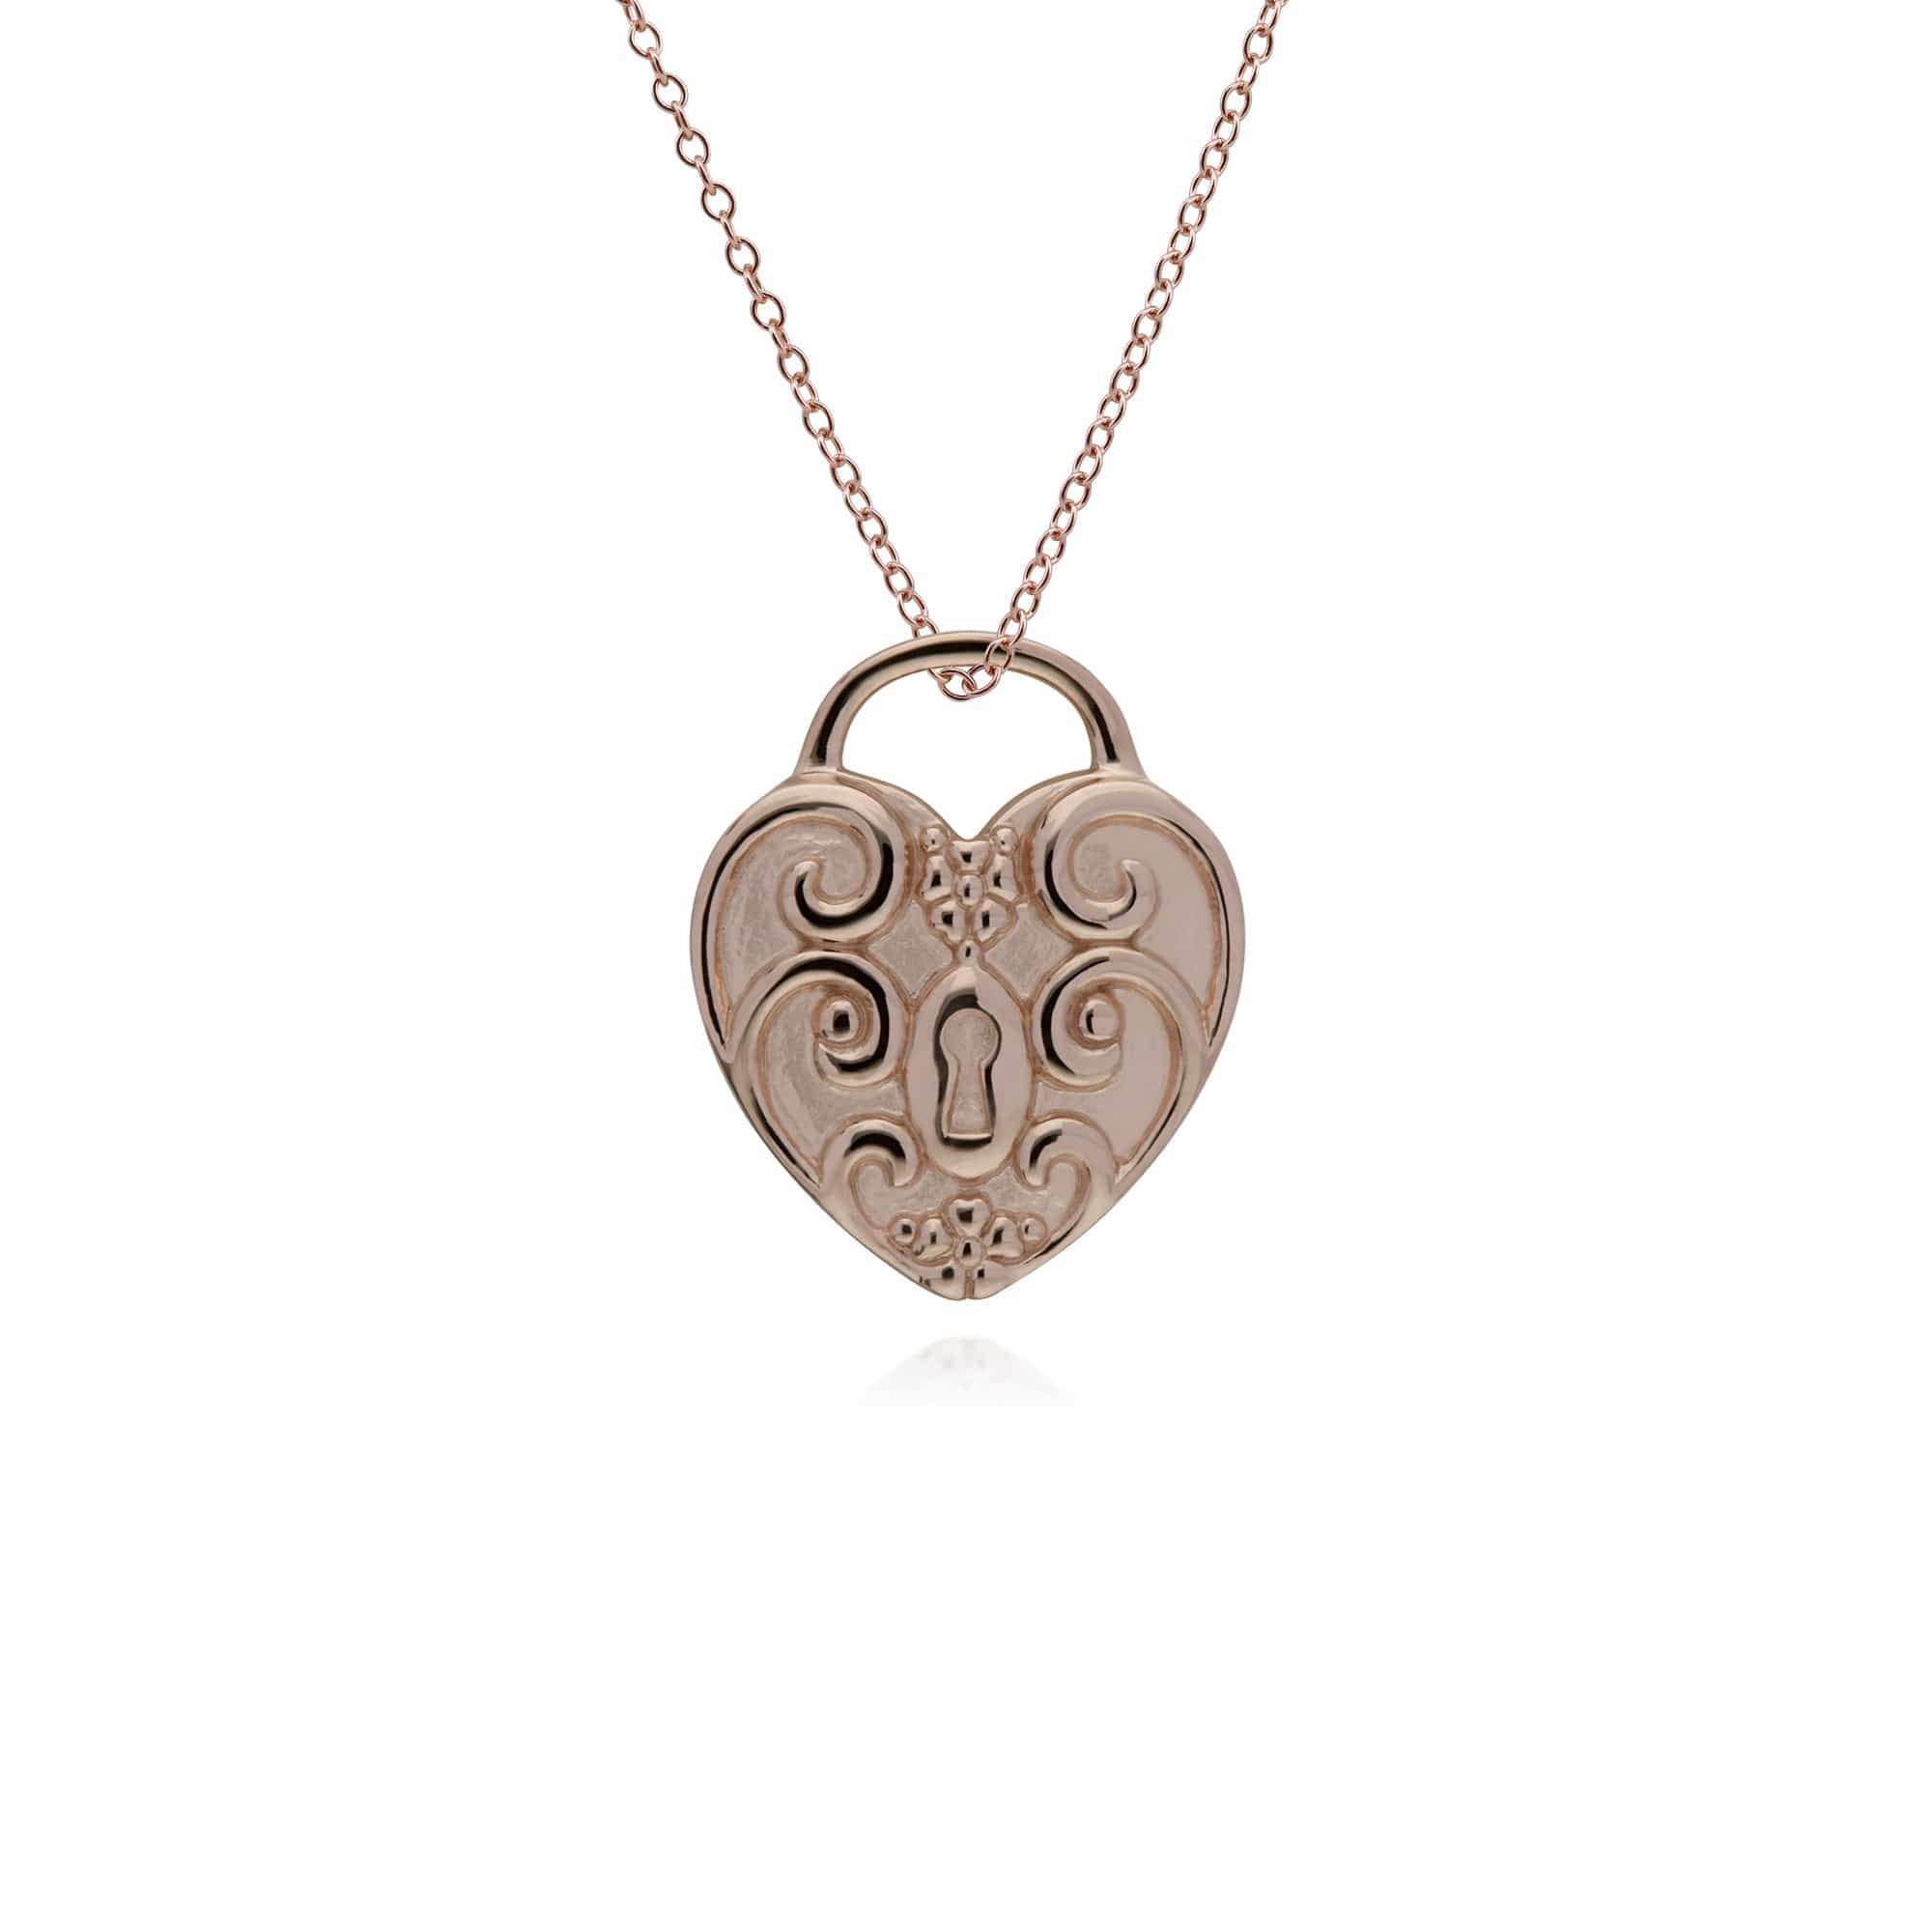 270P027310925-270P026501925 Classic Swirl Heart Lock Pendant & Sapphire Charm in Rose Gold Plated 925 Sterling Silver 3